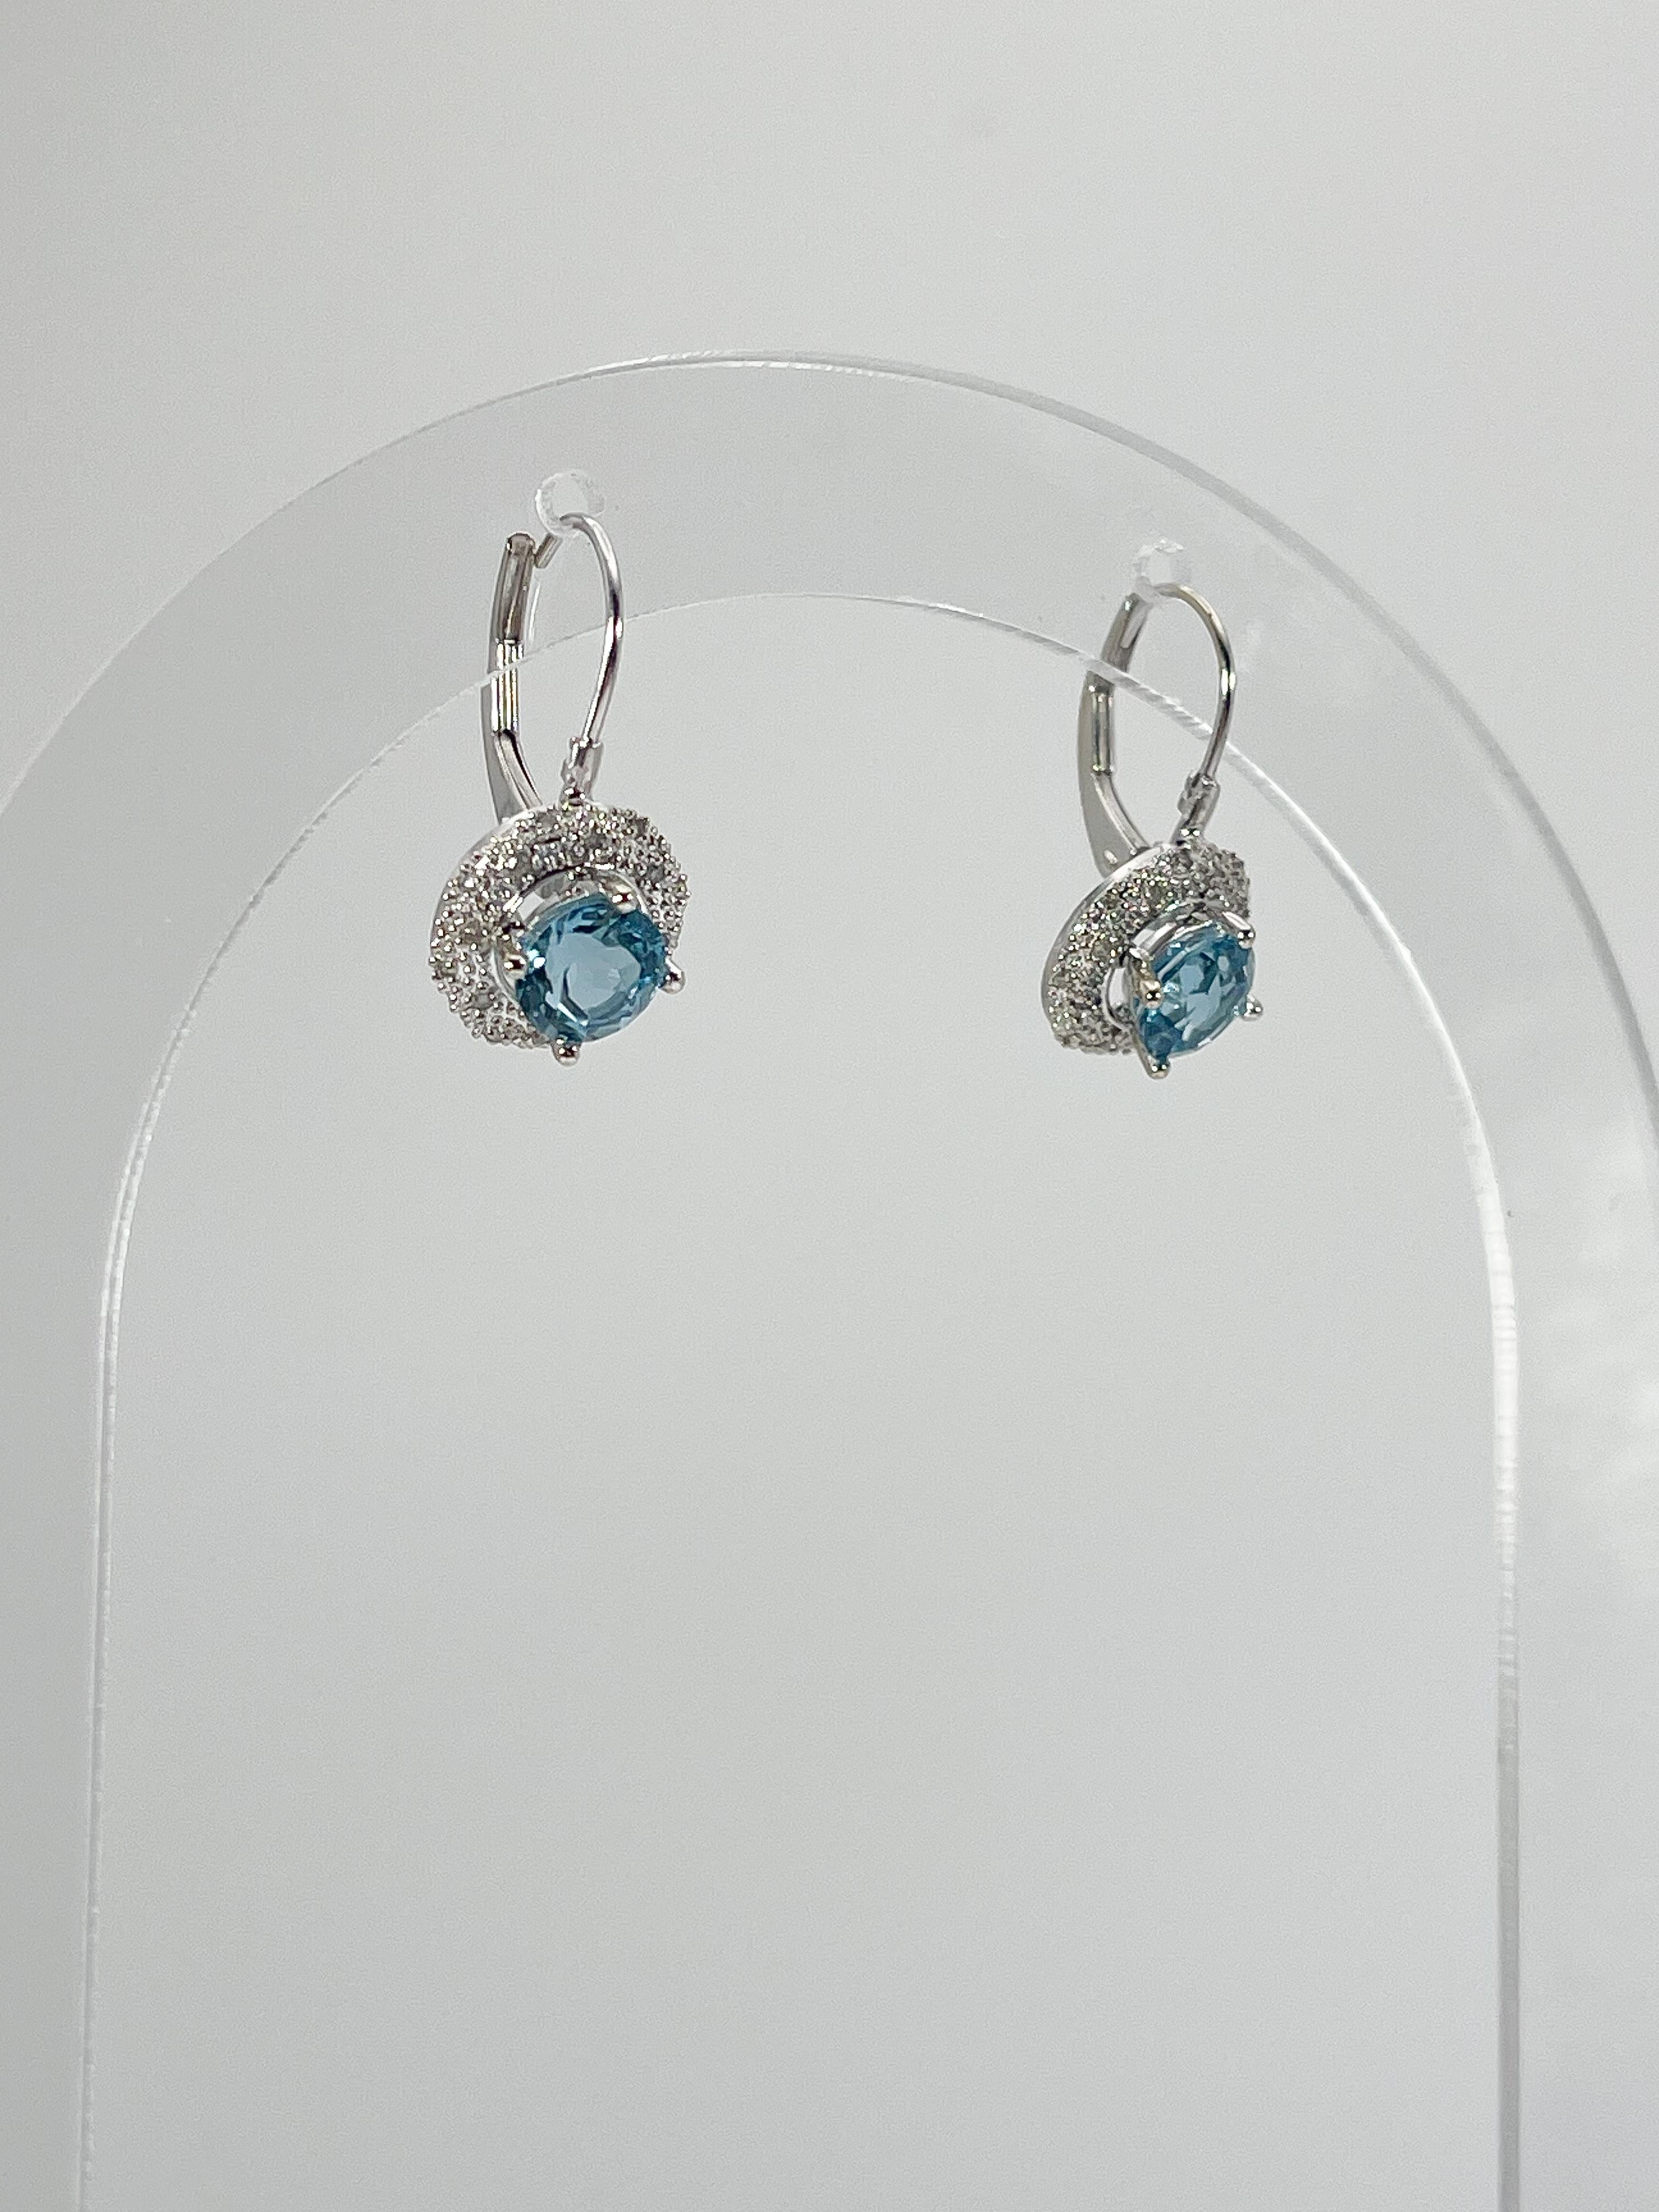 14K White Gold Round Swiss Blue Topaz Earrings  In Excellent Condition For Sale In Stuart, FL